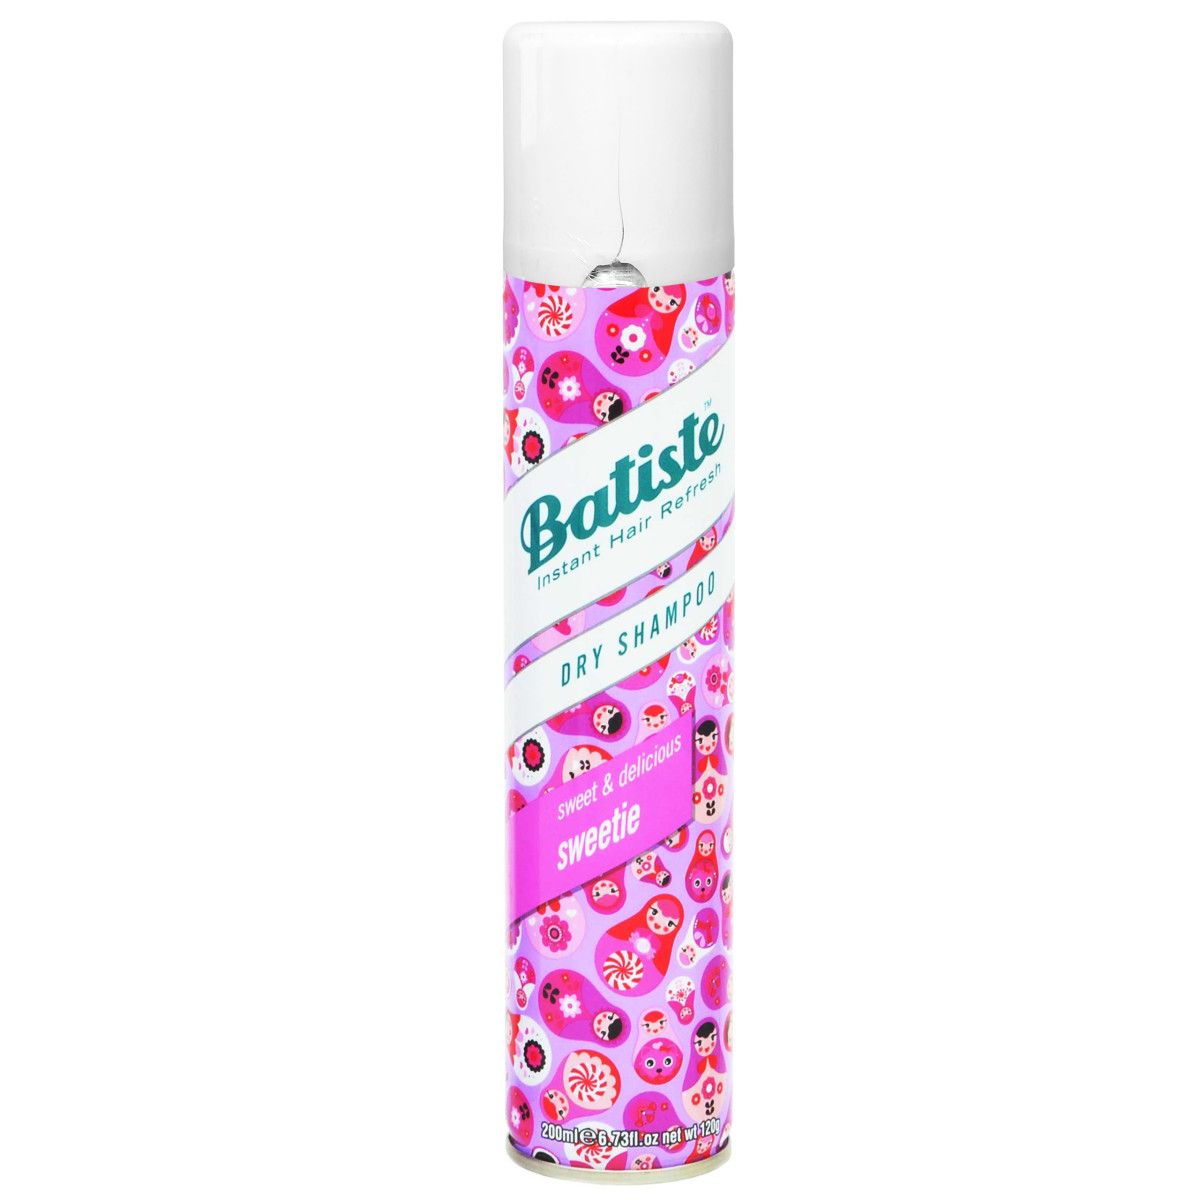 OUTLET Batiste Sweetie Dry Shampoo suchy szampon 200ml